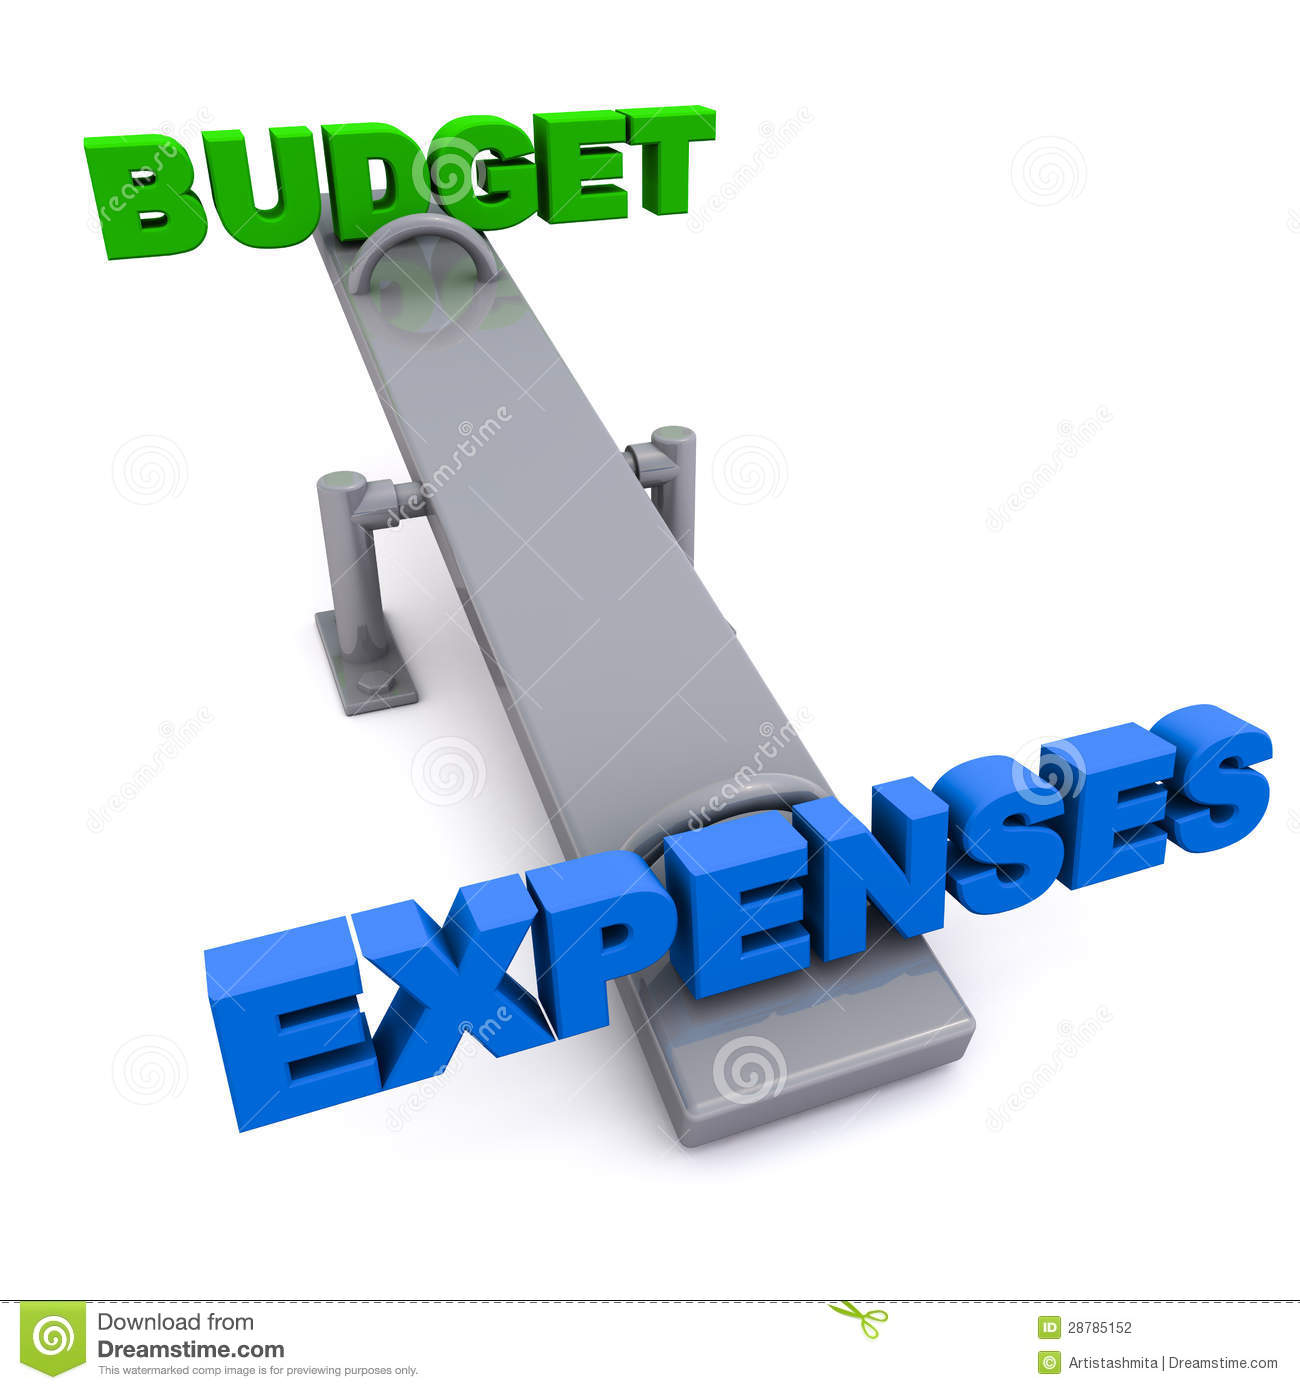 Concept Of Over The Budget Expenses And Exceeding The Budget